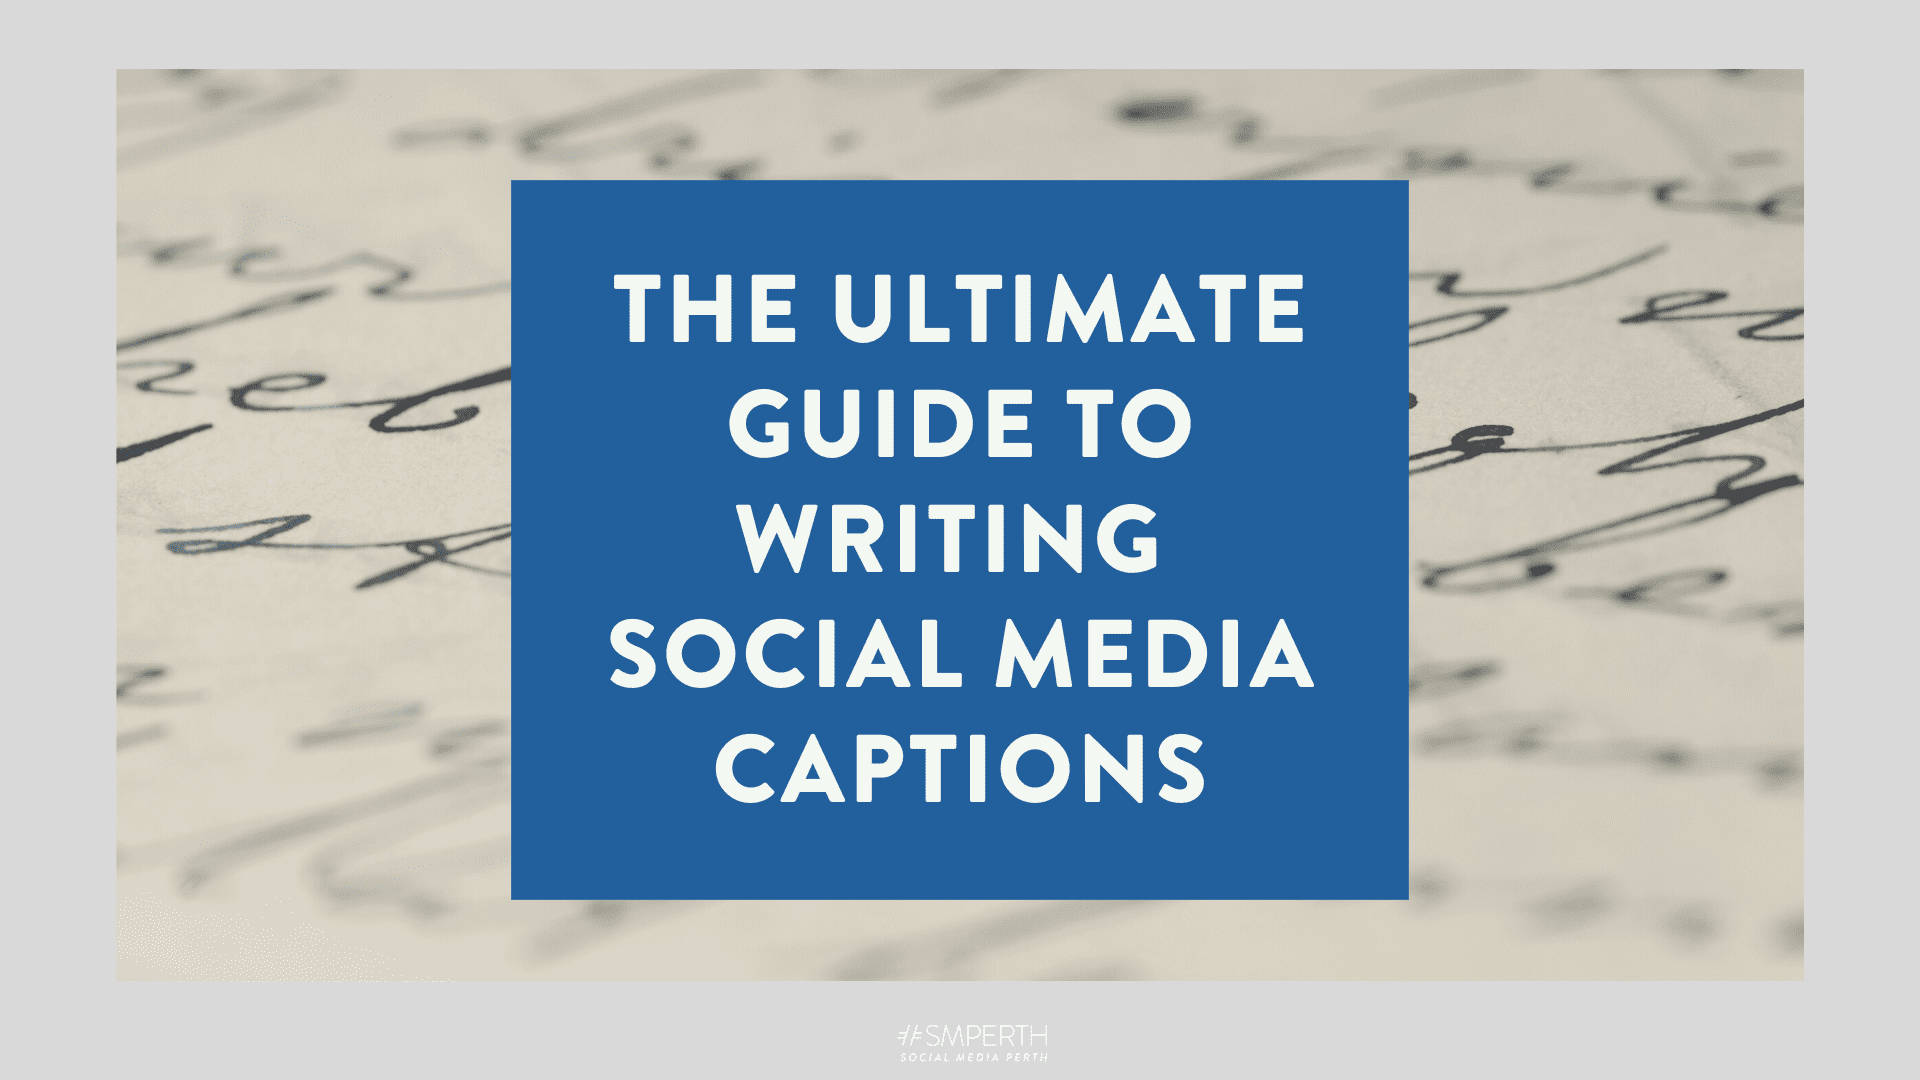 The Ultimate Guide to Writing Social Media Captions